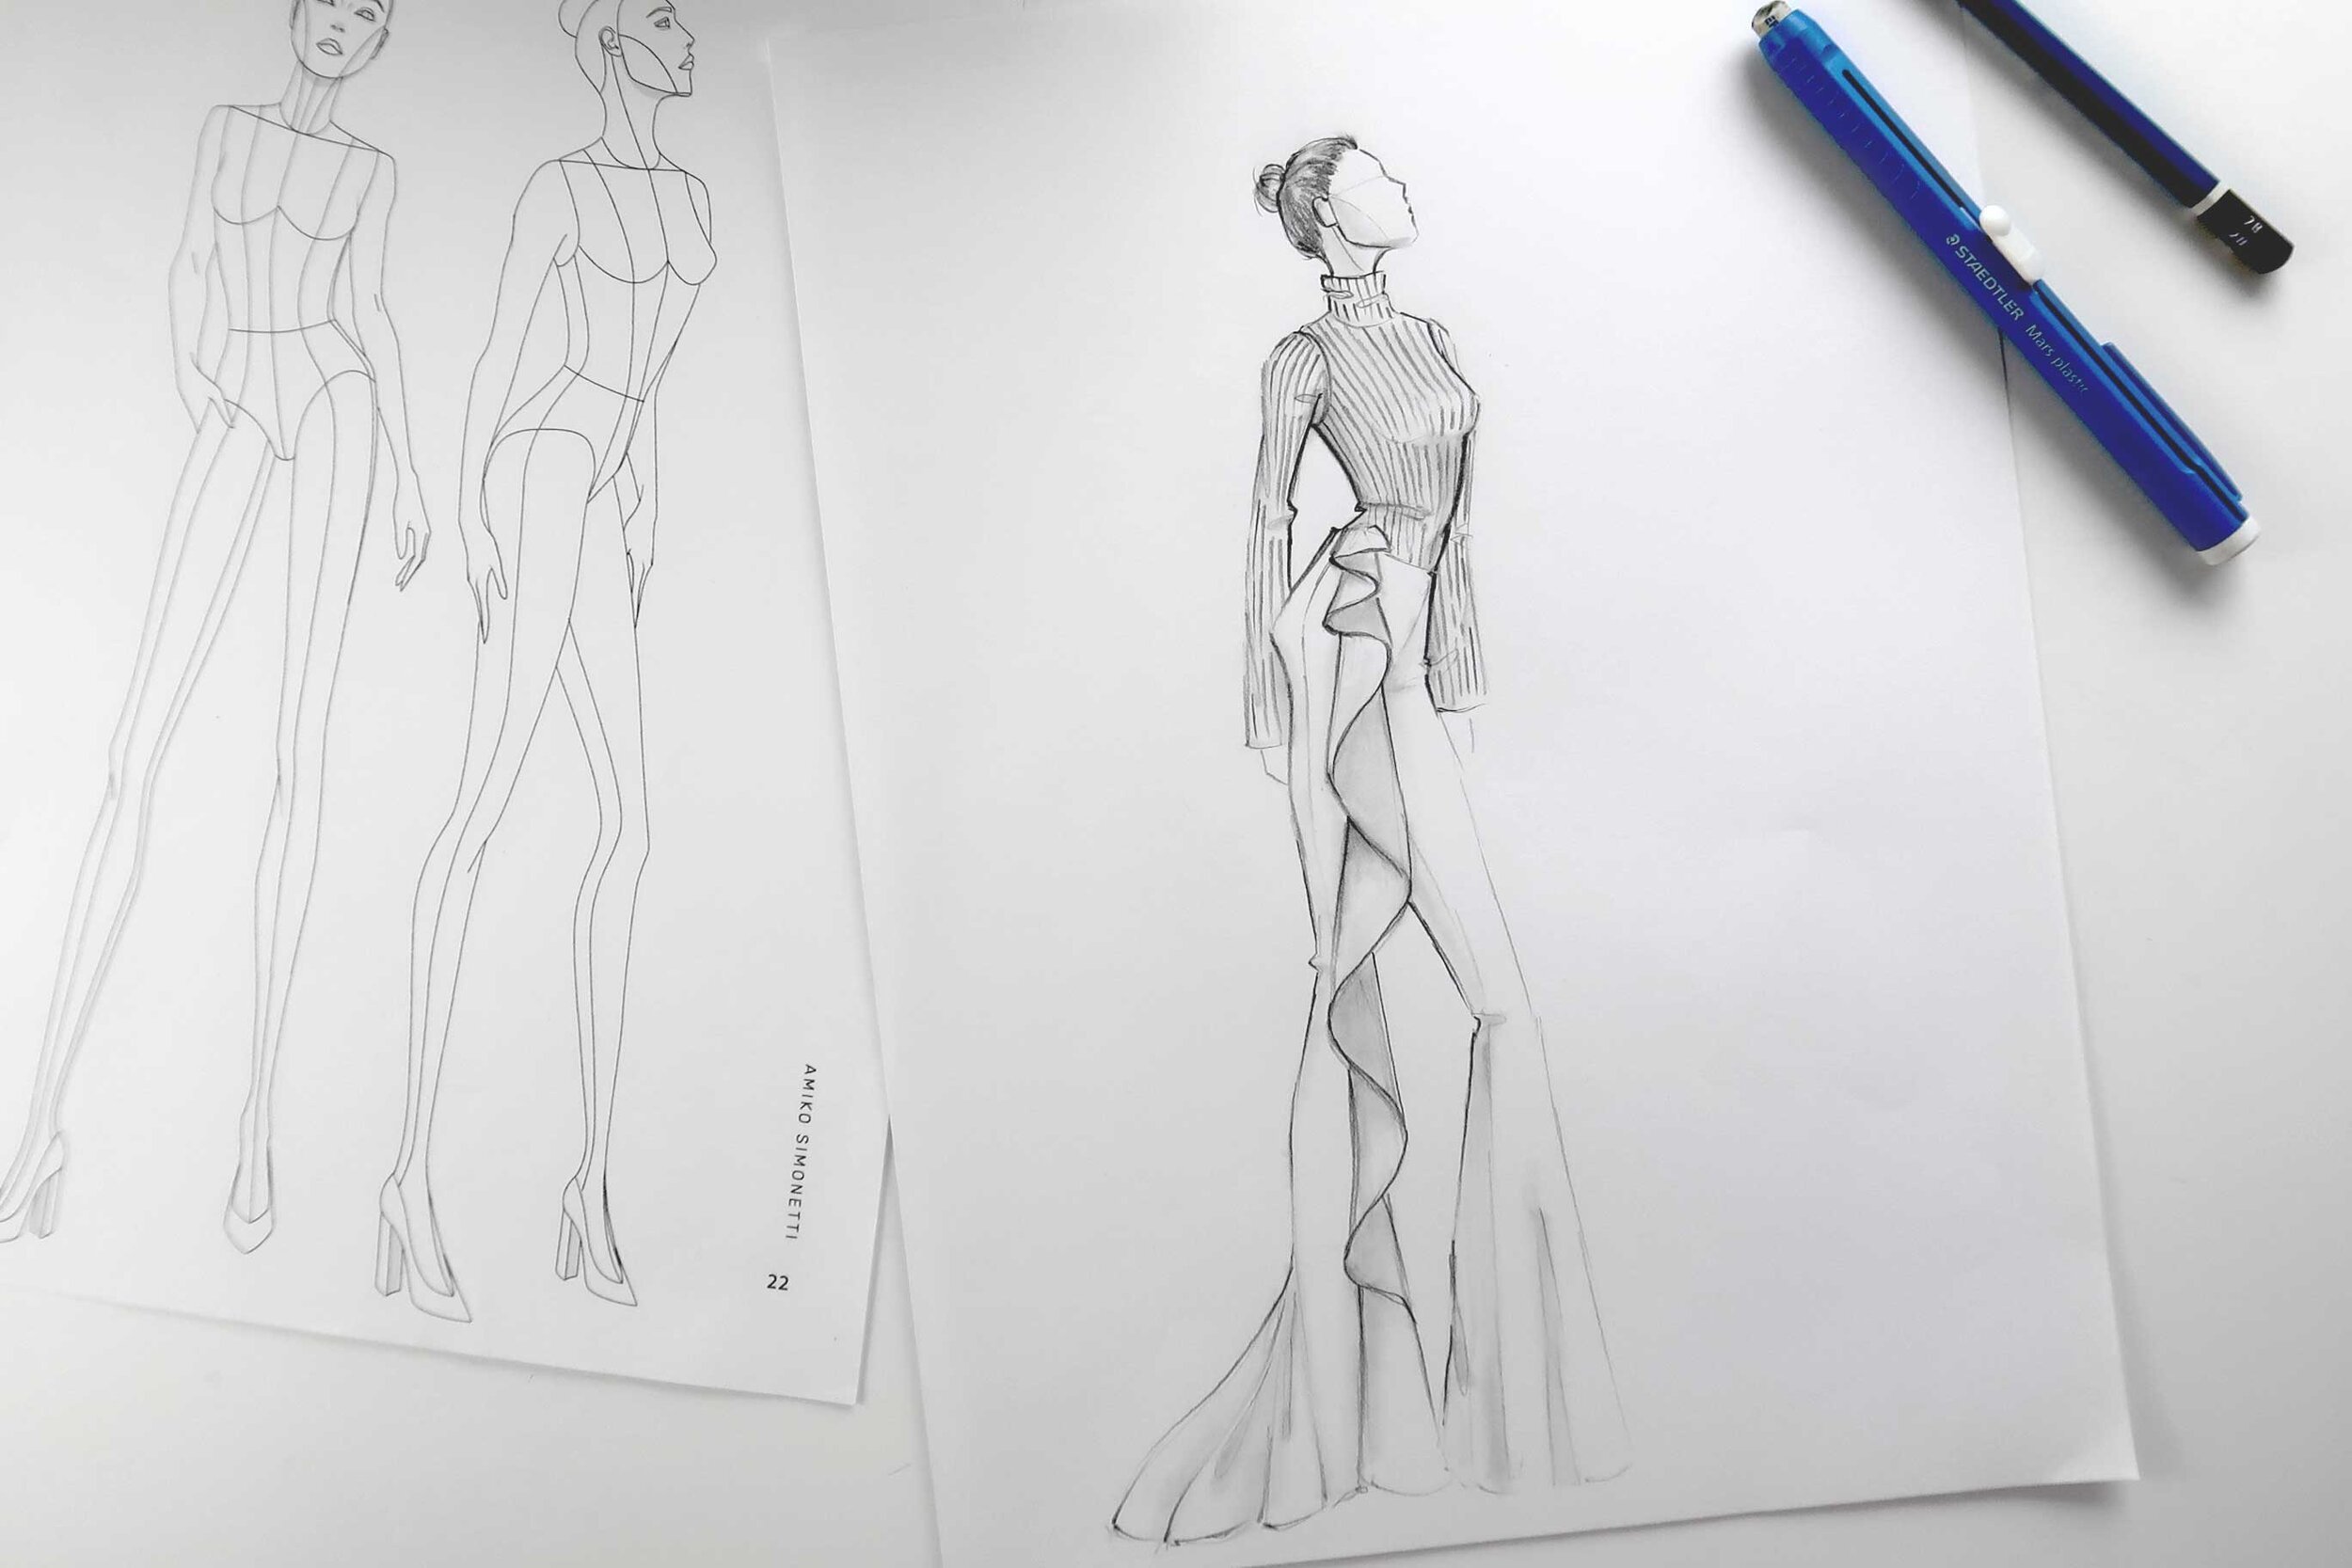 Fashion Design Sketchbook Figure Template: This Fashion Illustration  Sketchbook Contains 100+ Female Fashion Figure Templates. Makes An Ideal  Fashion (Paperback)